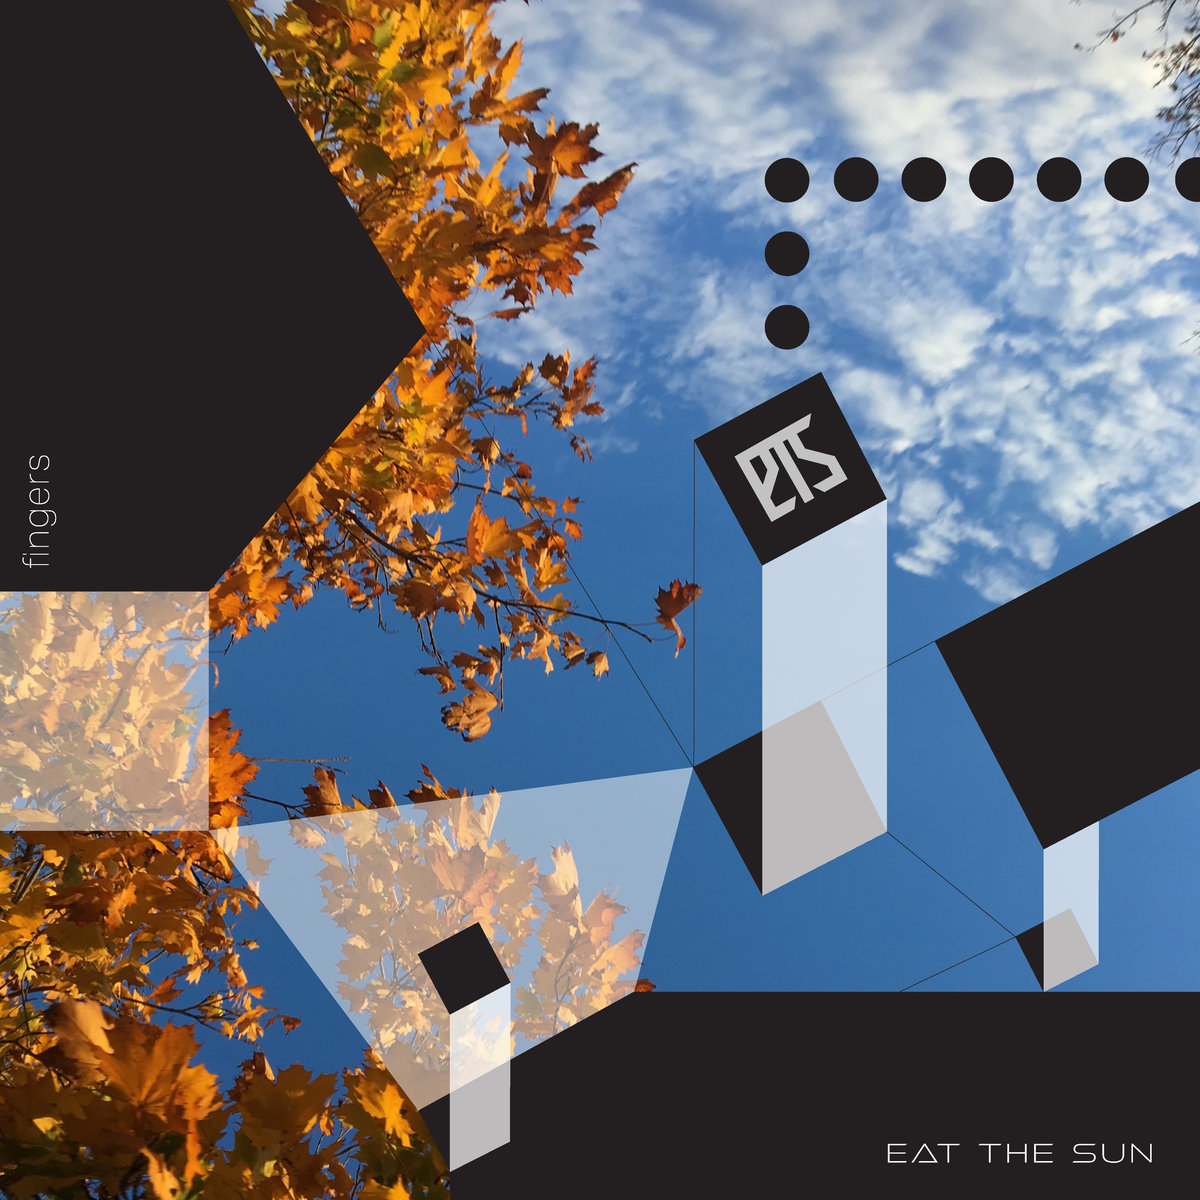 Fingers Room of Wires remix appears on Fingers EP by Eat The Sun